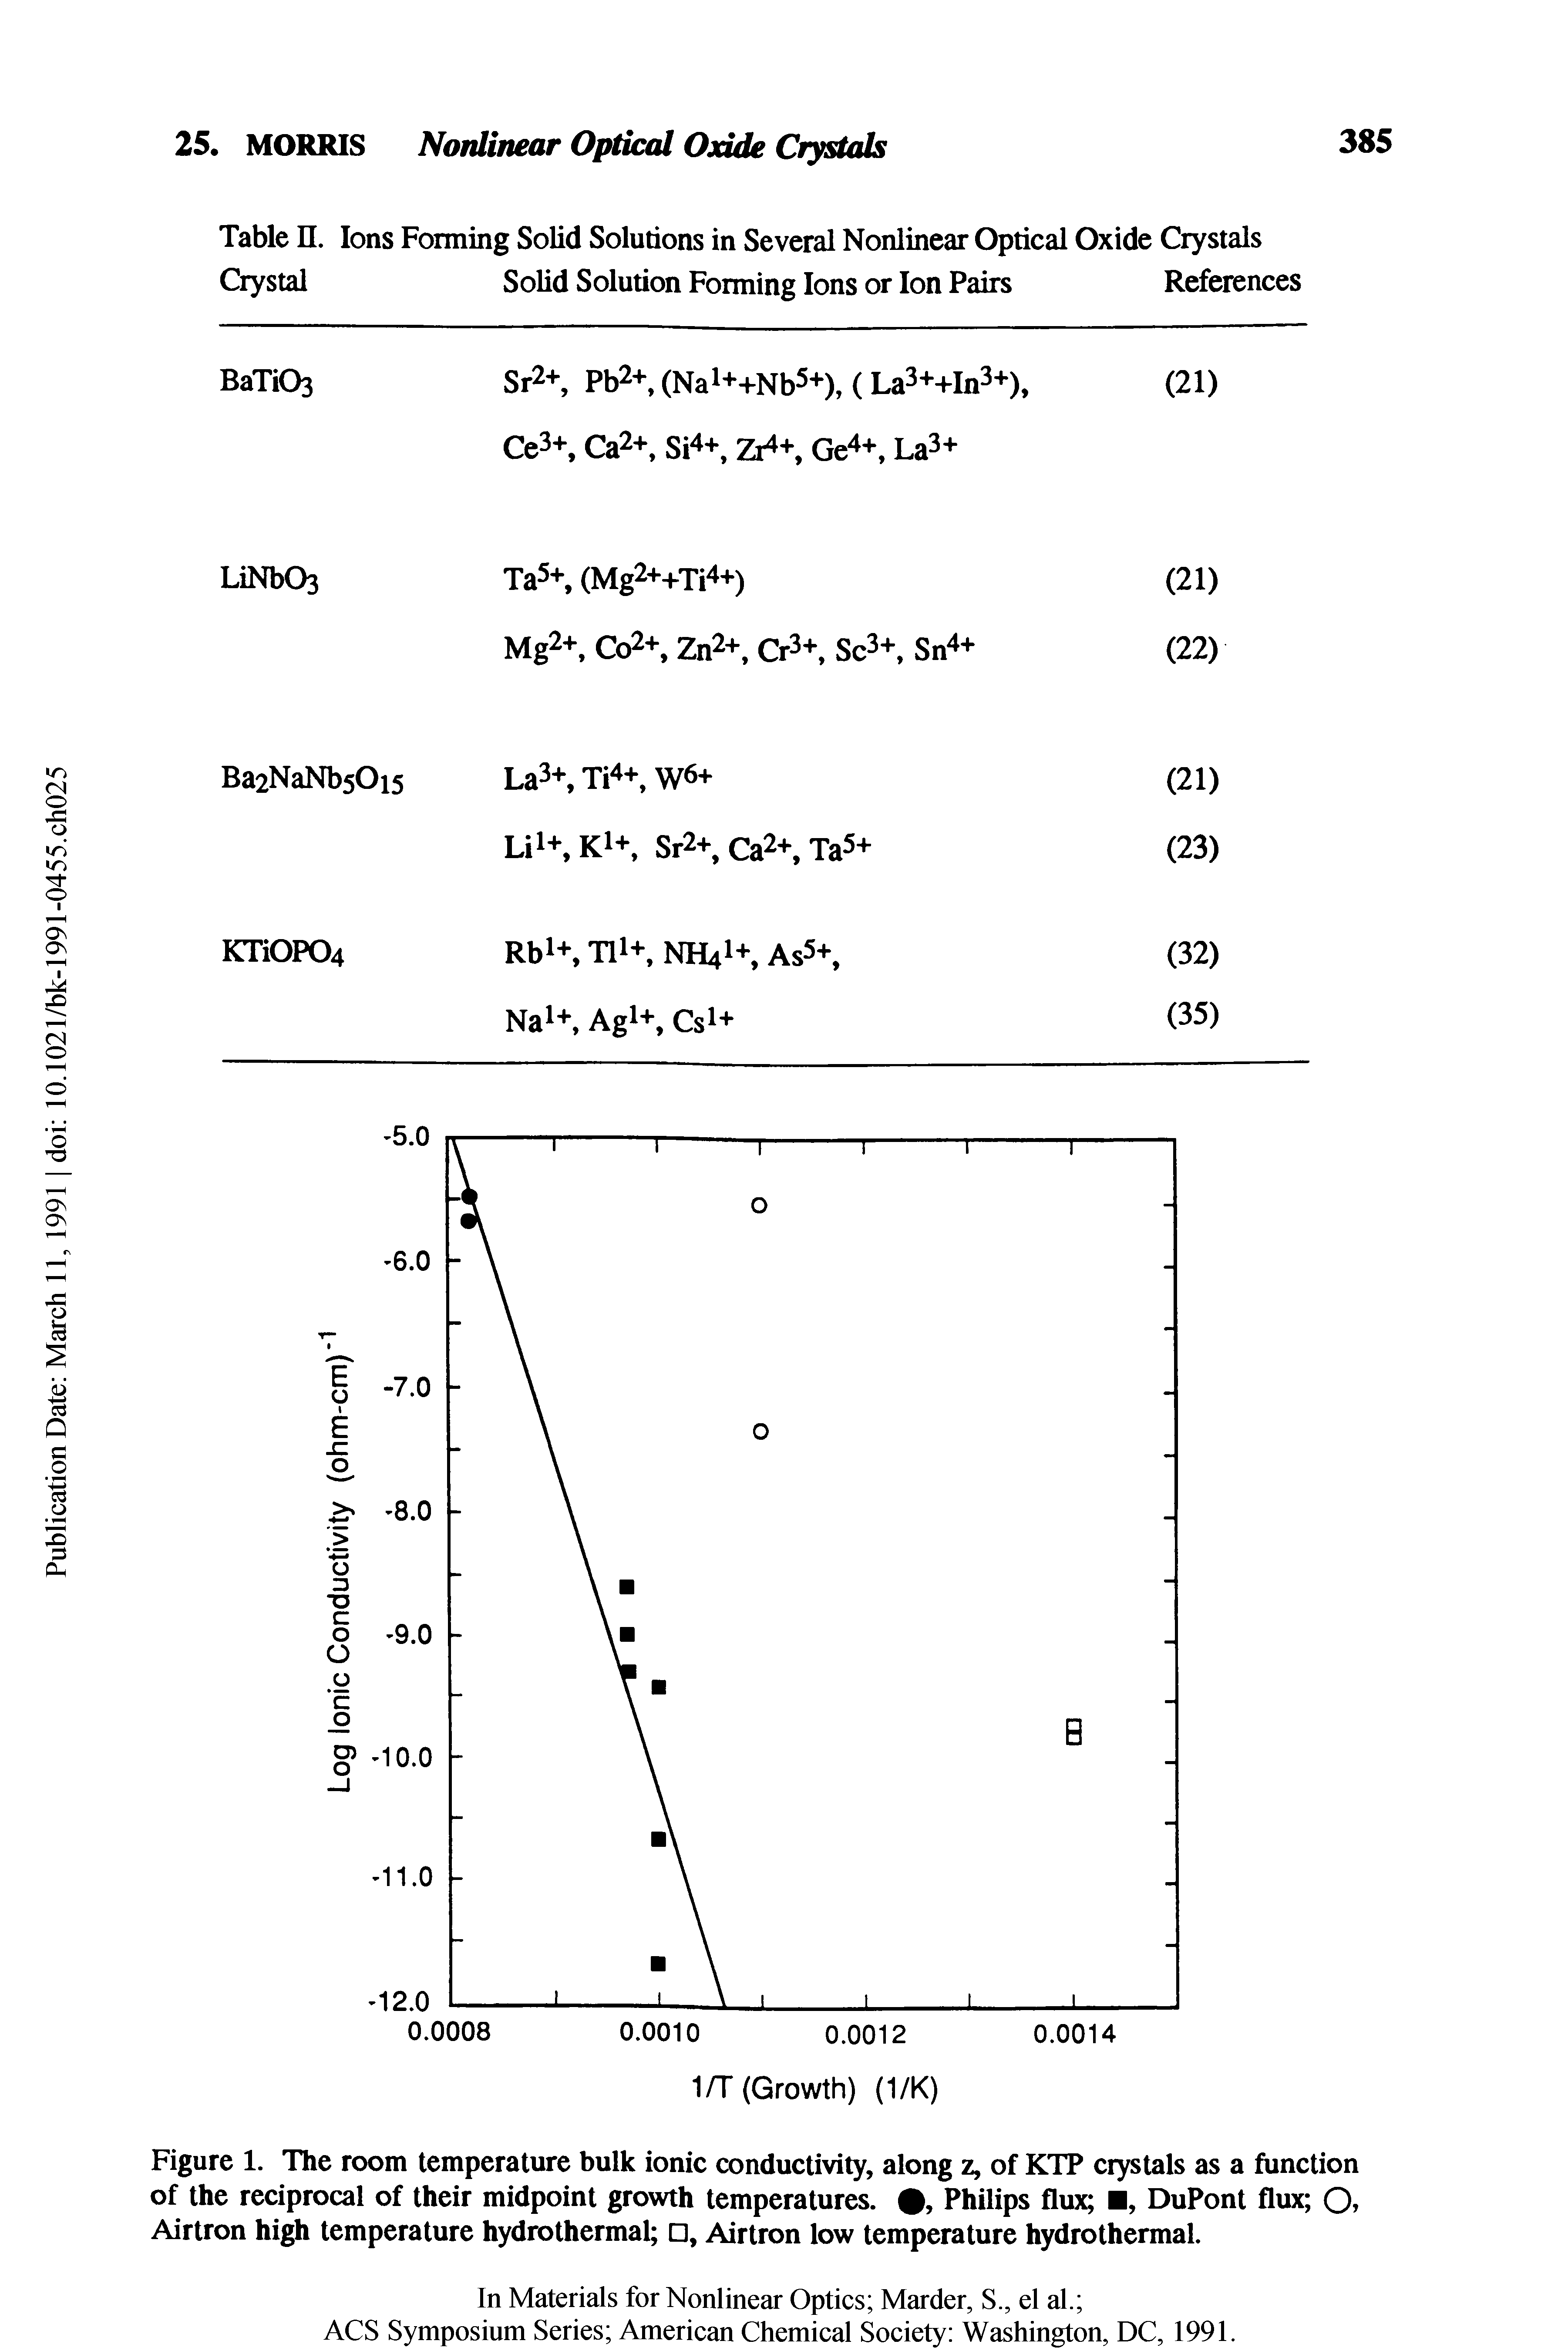 Figure 1. The room temperature bulk ionic conductivity, along z, of KTP crystals as a function of the reciprocal of their midpoint growth temperatures., Philips flux , DuPont flux O Airtron high temperature hydrothermal , Airtron low temperature hydrothermal.